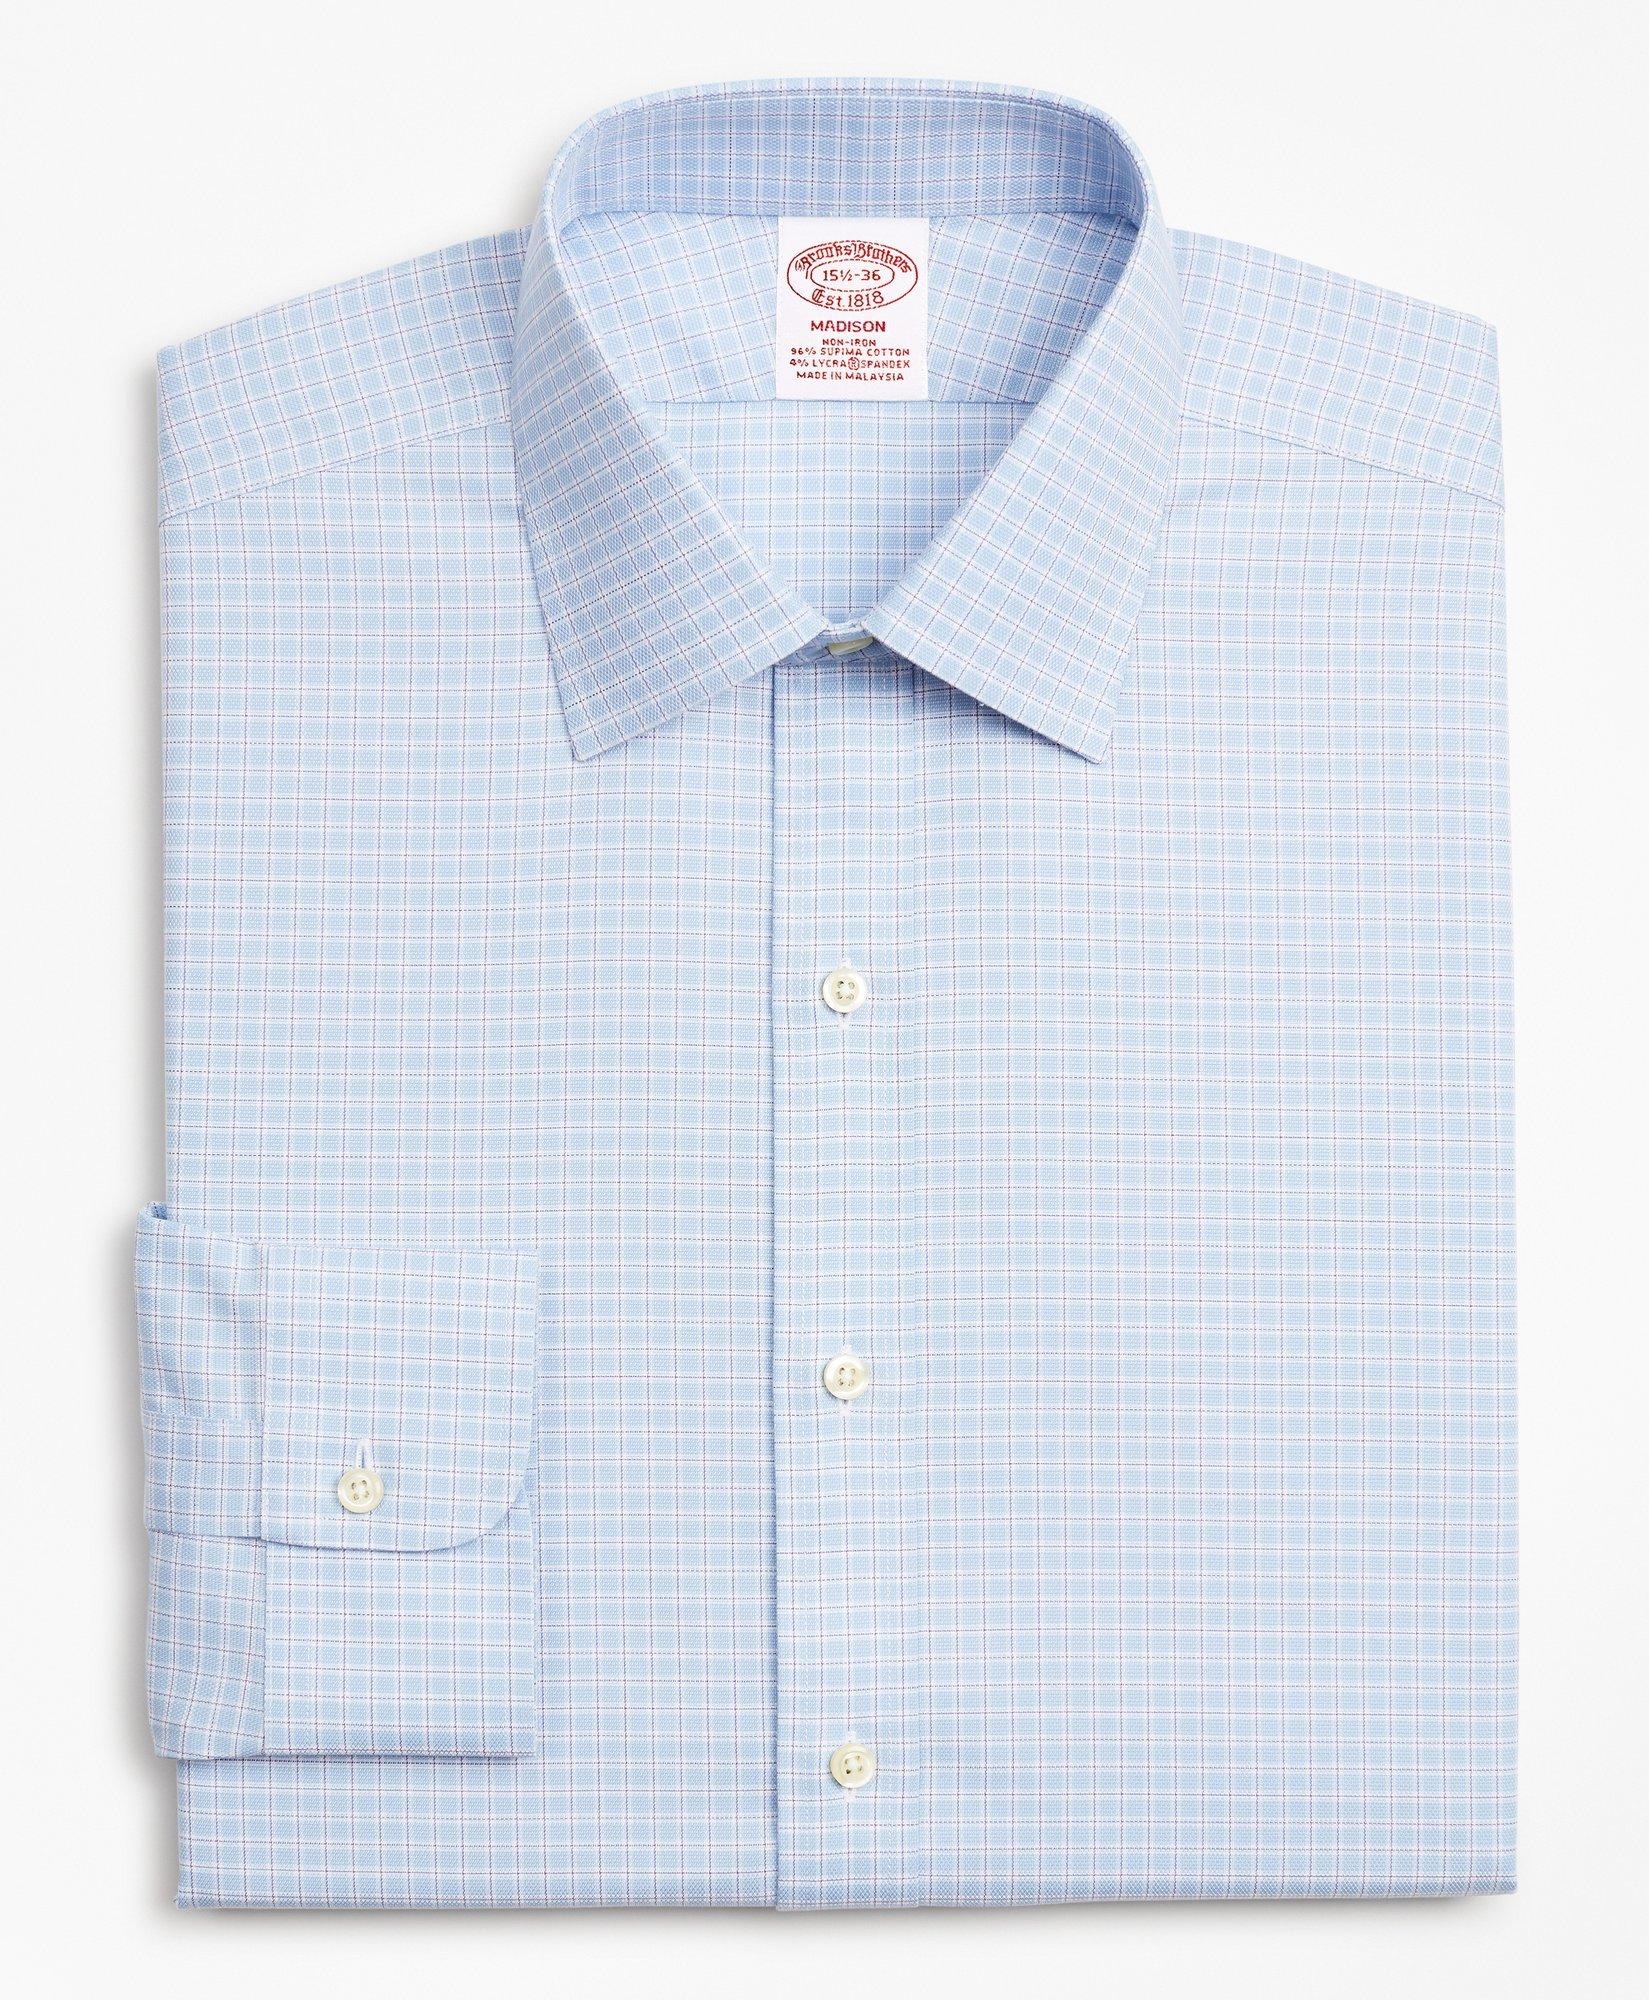 Stretch Madison Relaxed-Fit Dress Shirt, Non-Iron Royal Oxford Ainsley ...